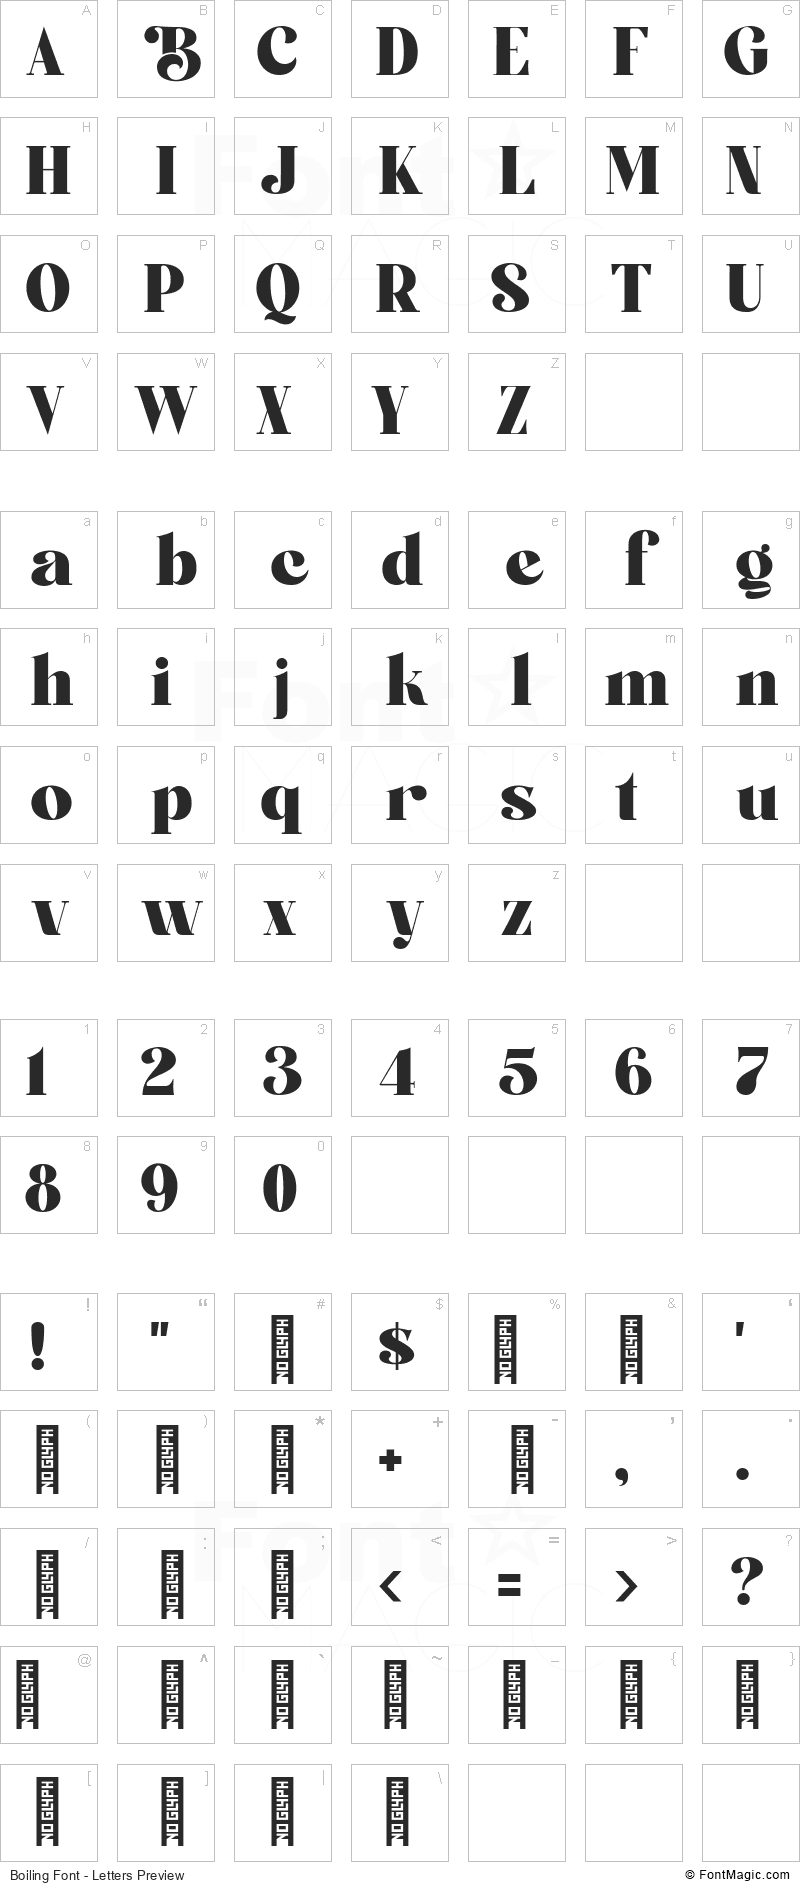 Boiling Font - All Latters Preview Chart